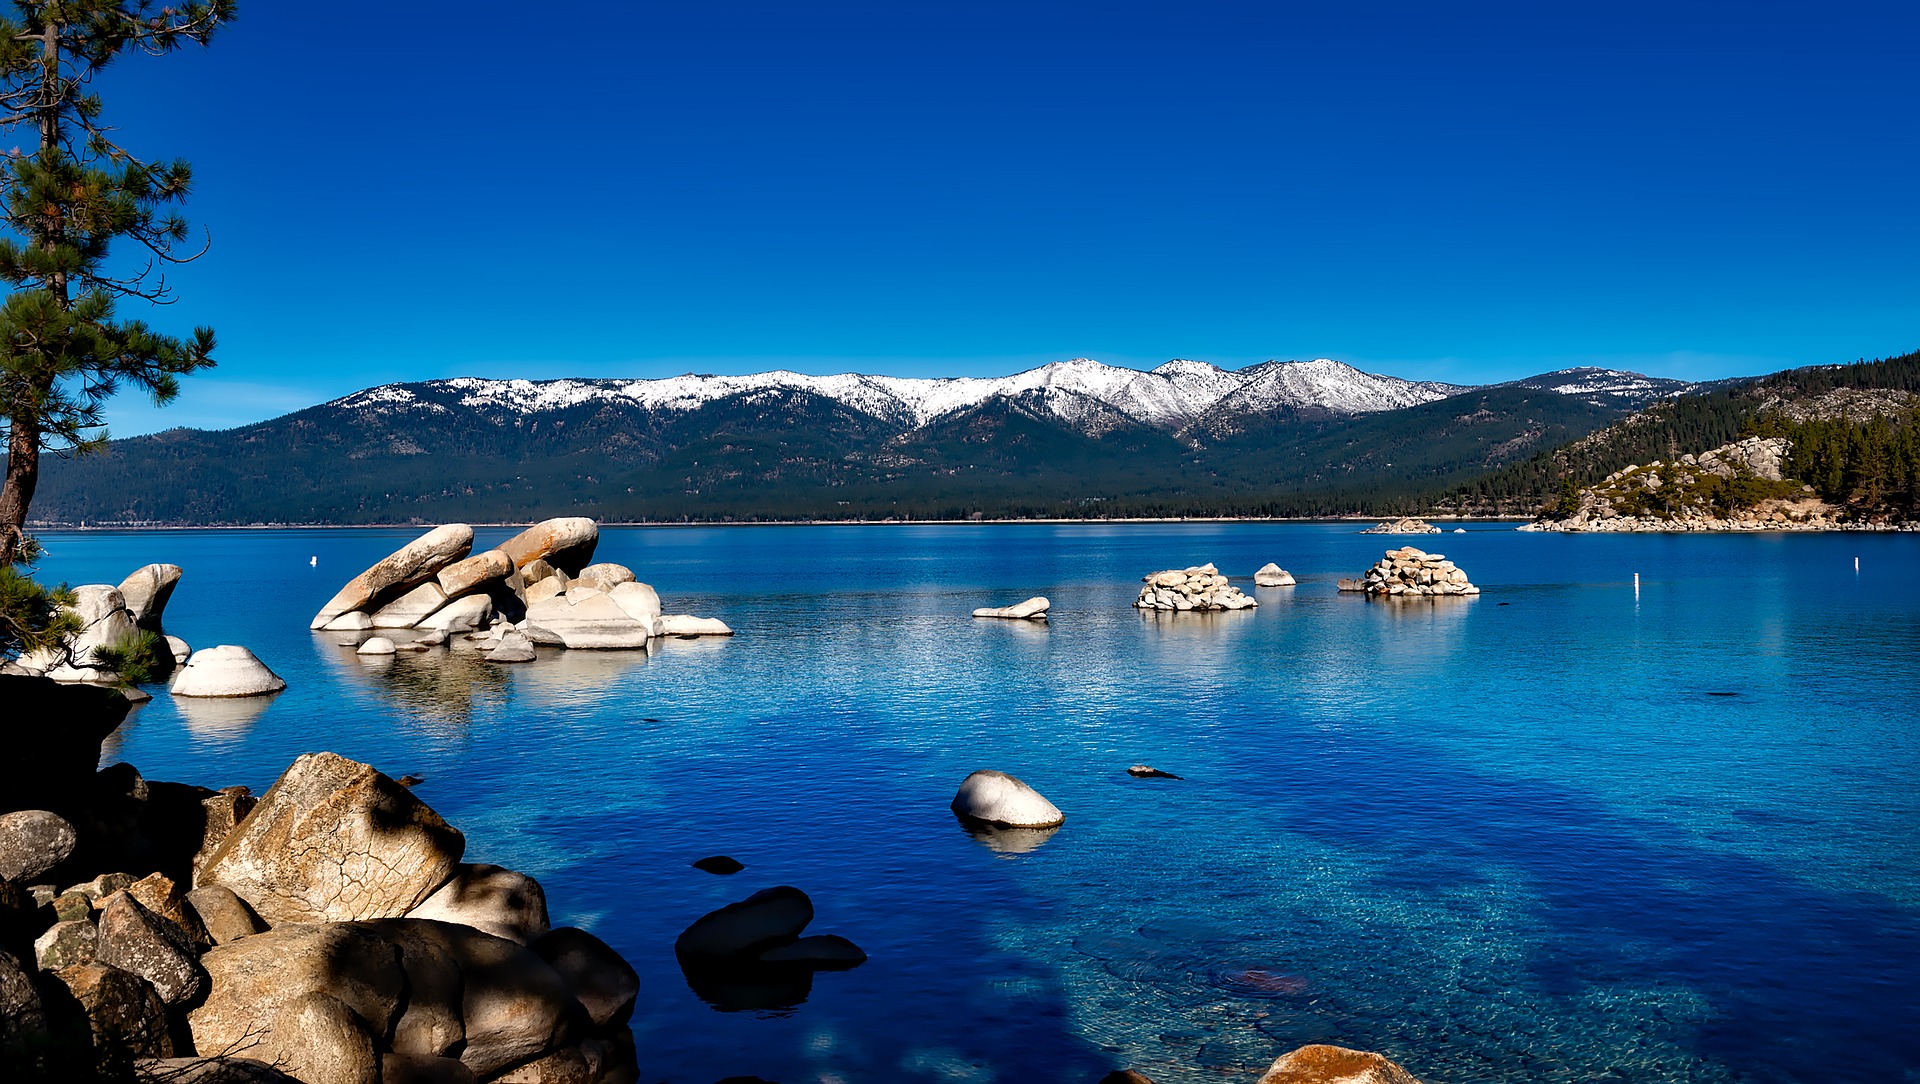 Snowy mountains over Lake Tahoe